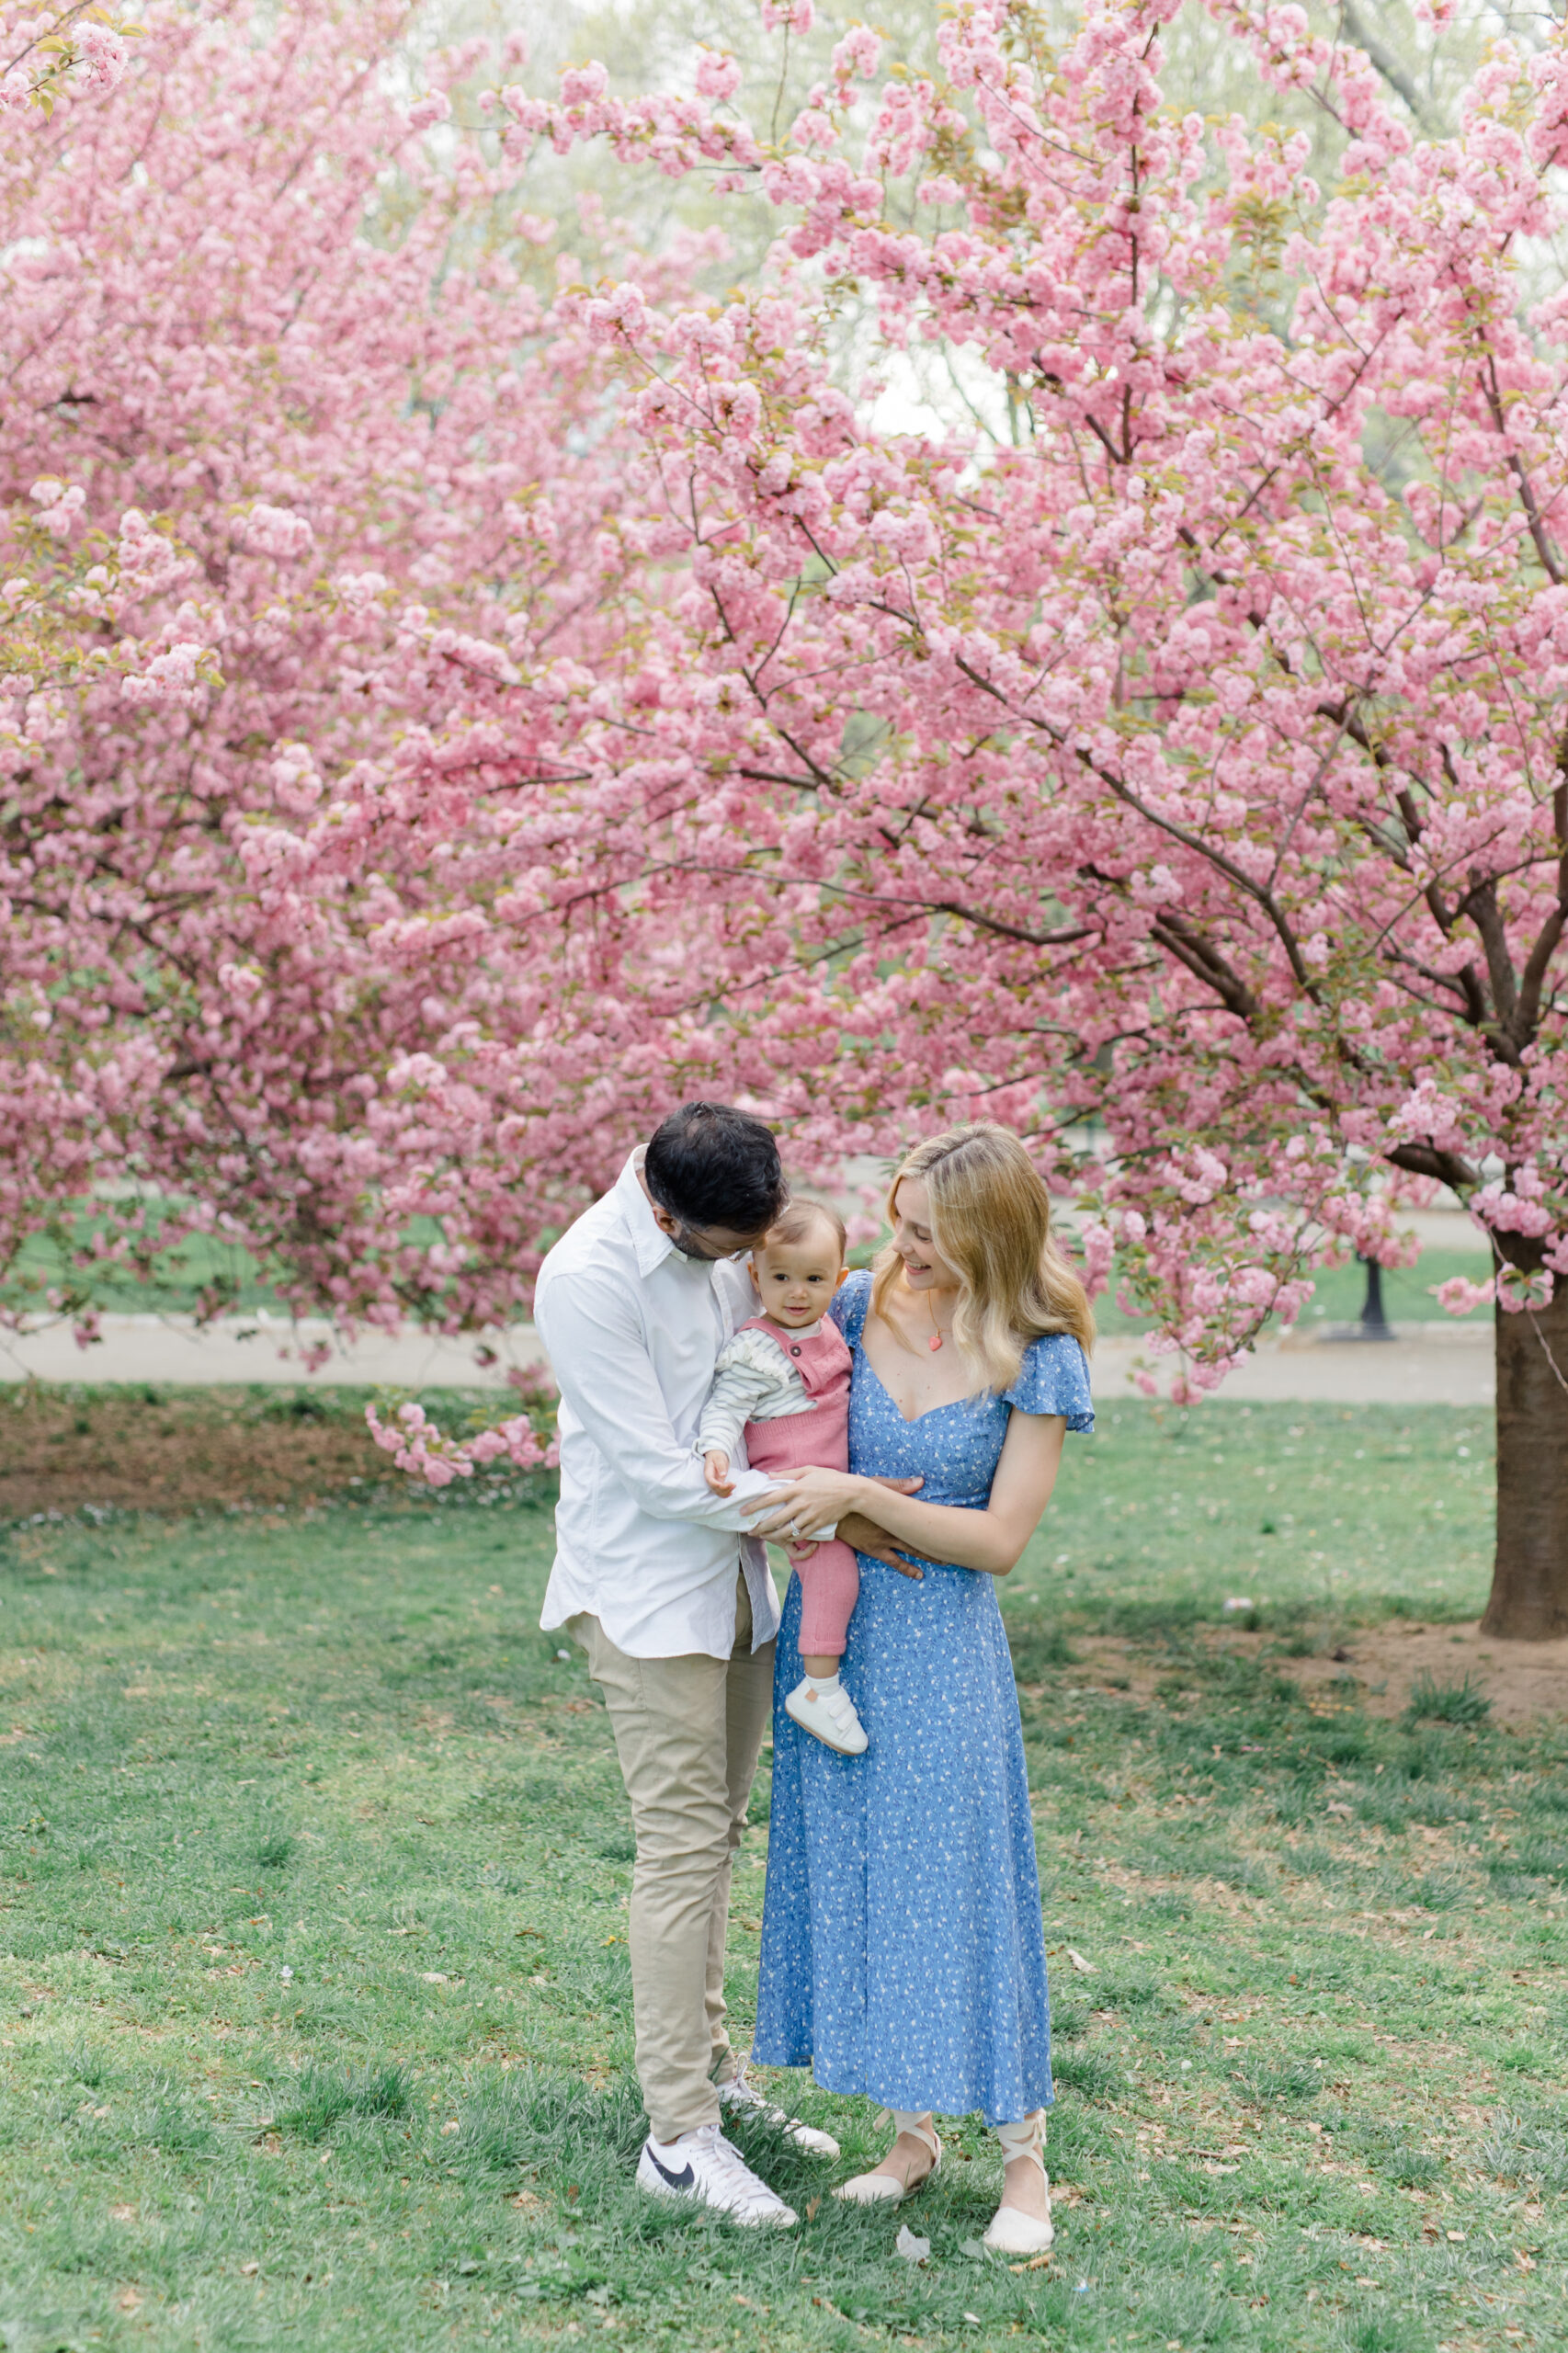 A mom and dad hold their baby in the cherry blossoms at a spring family mini session in Central Park shot by Jacqueline Clair Photography